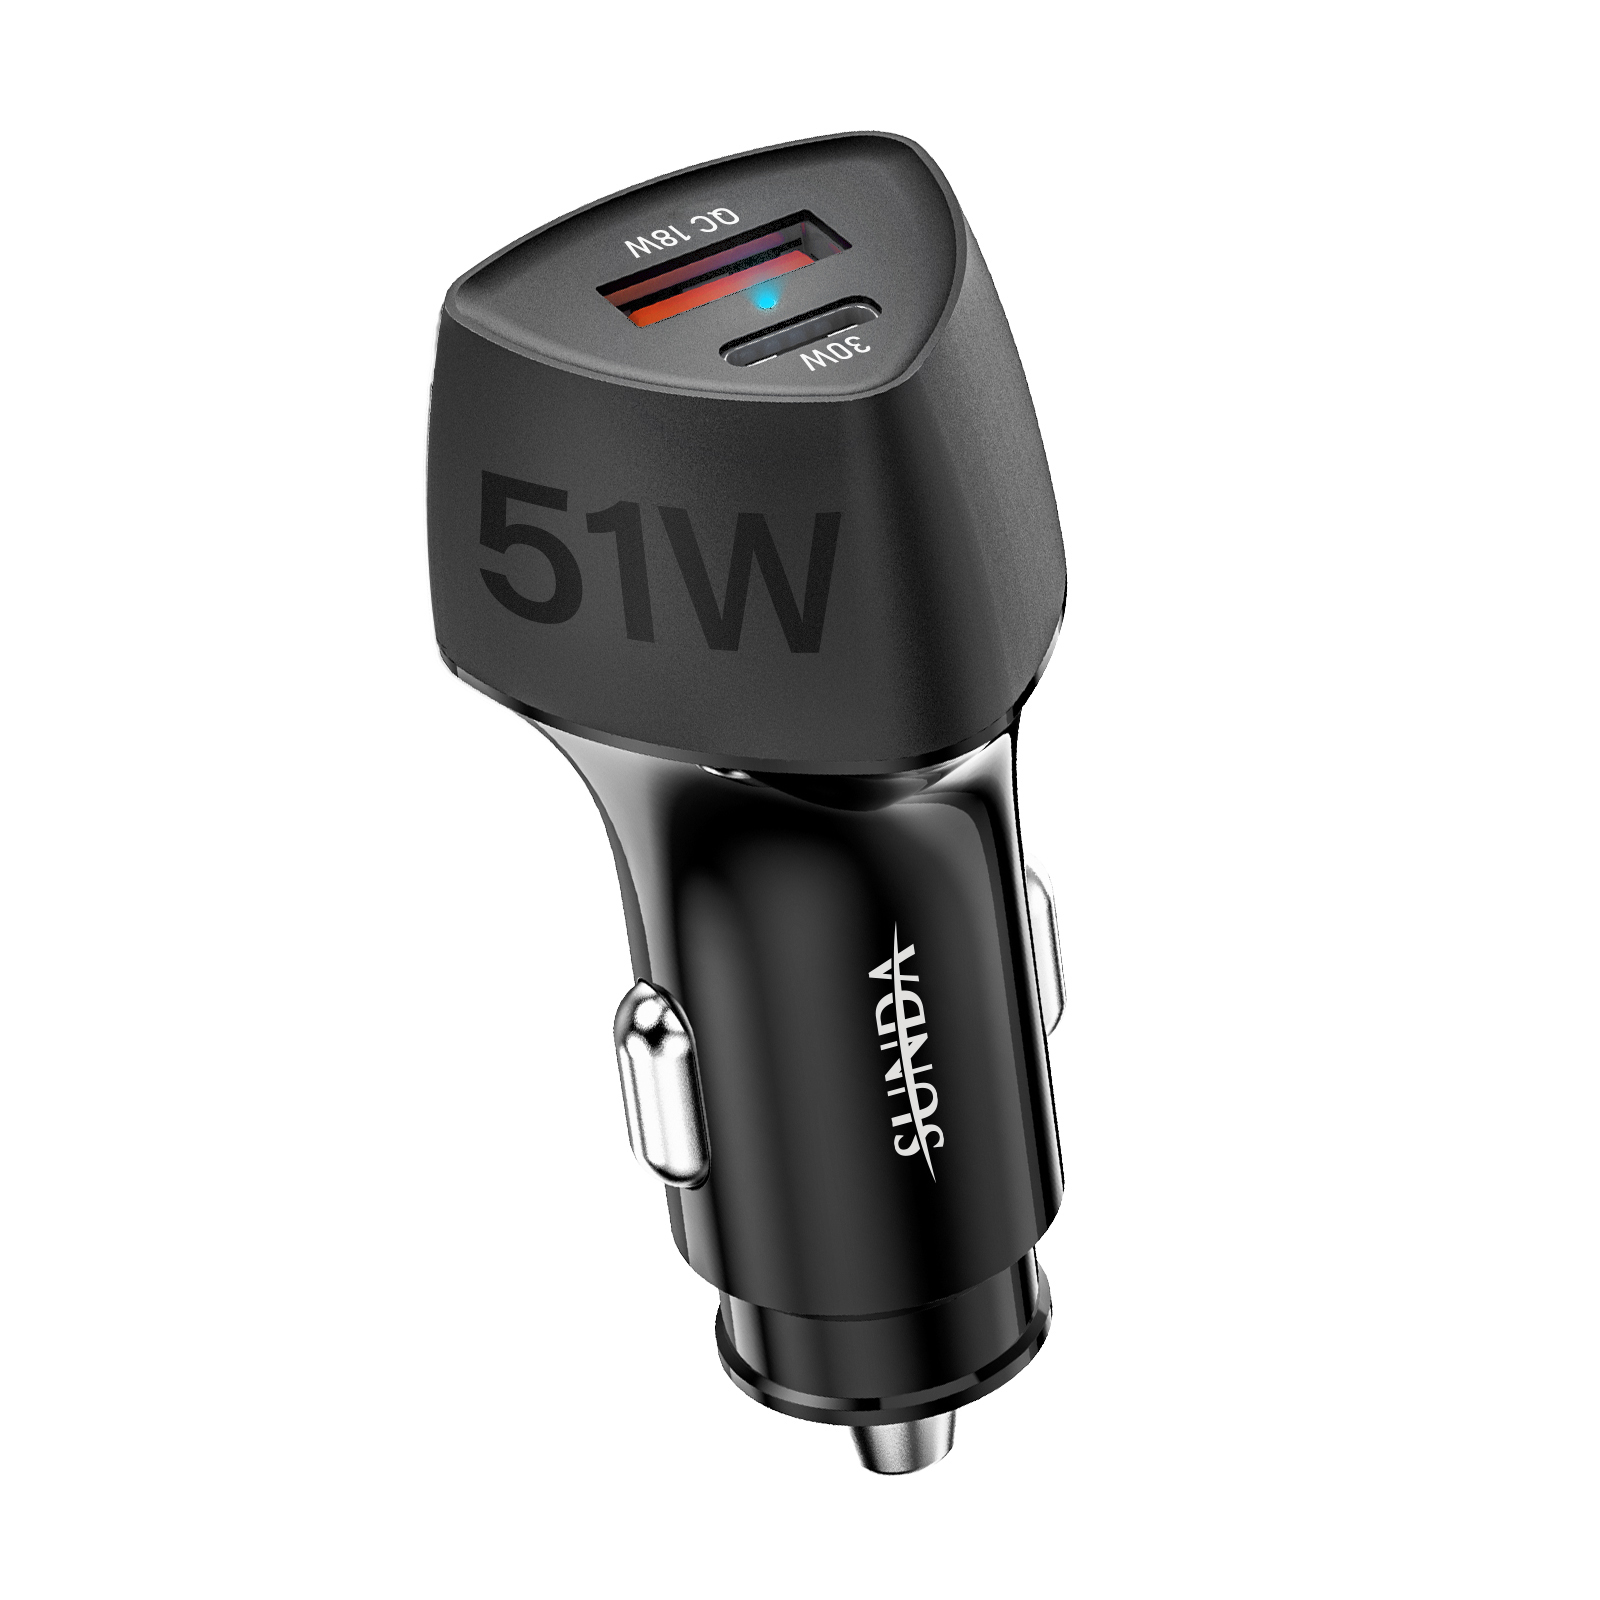 SUNDA USB C Fast Car Charger 51W Dual Ports PD/PPS&QC3.0, Cell Phone Automobile Chargers, for Ap